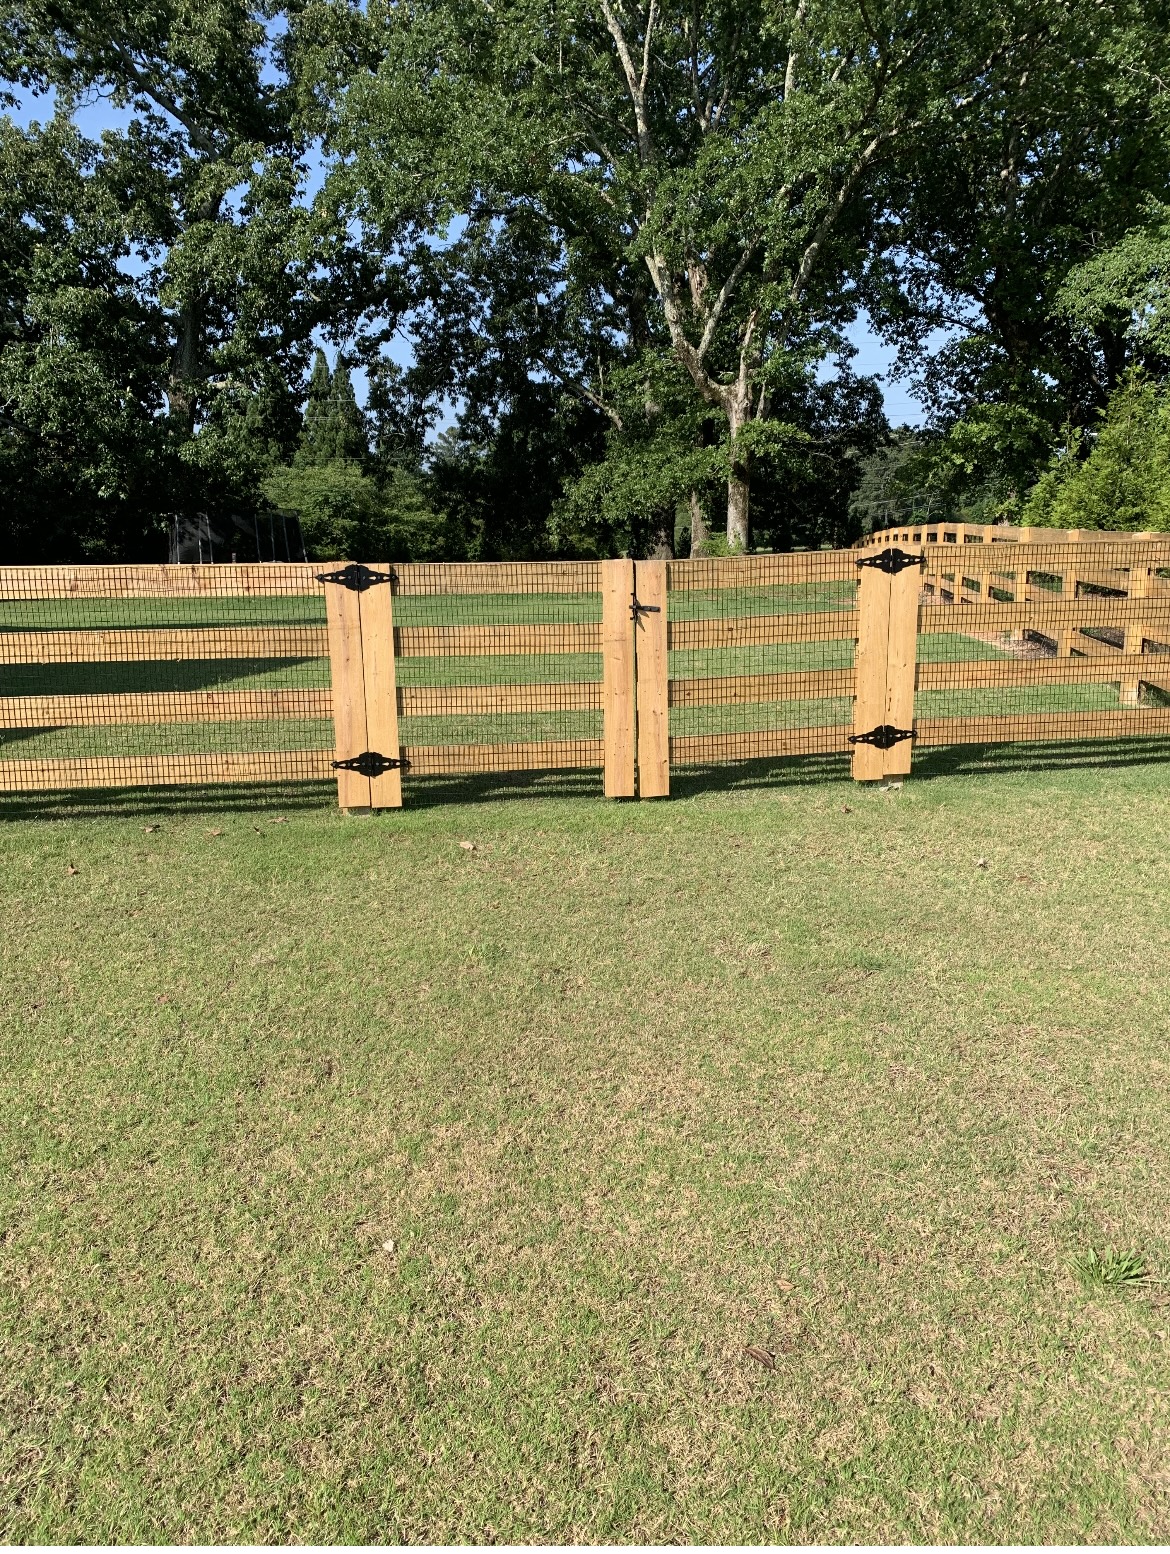 4 Rail fence with welded wire